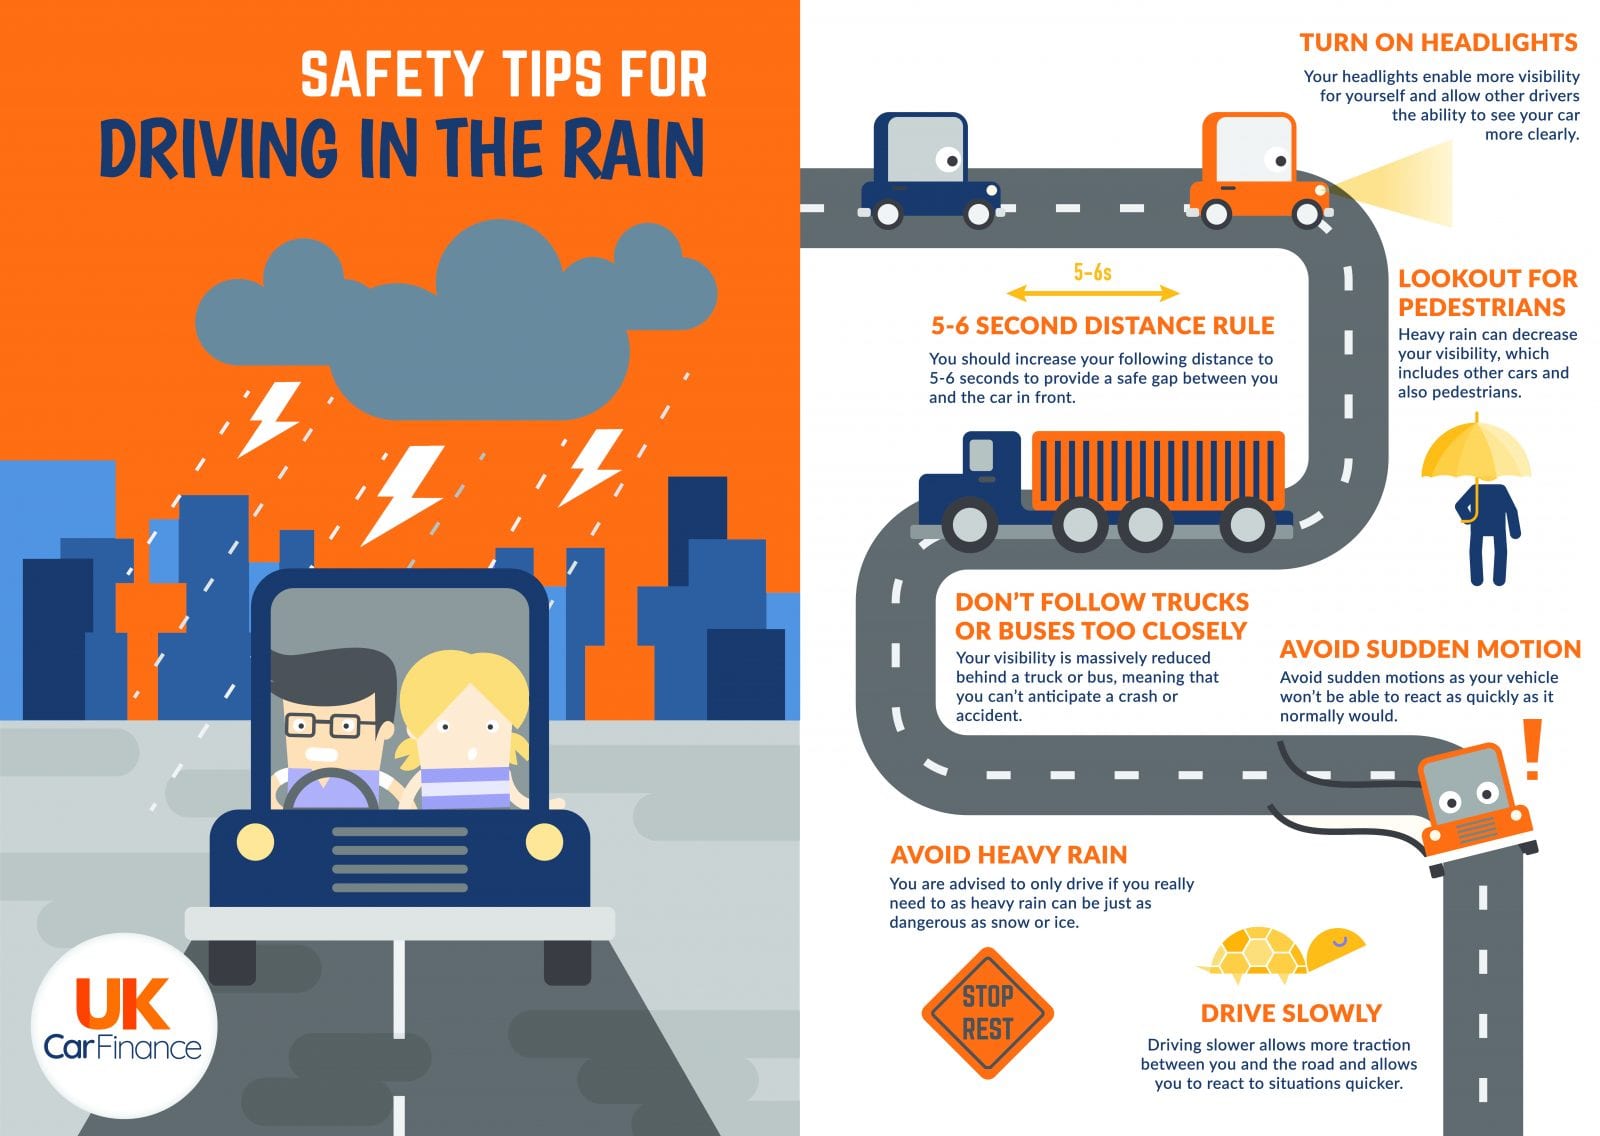 UK Car Finance - safety tips for driving in the rain